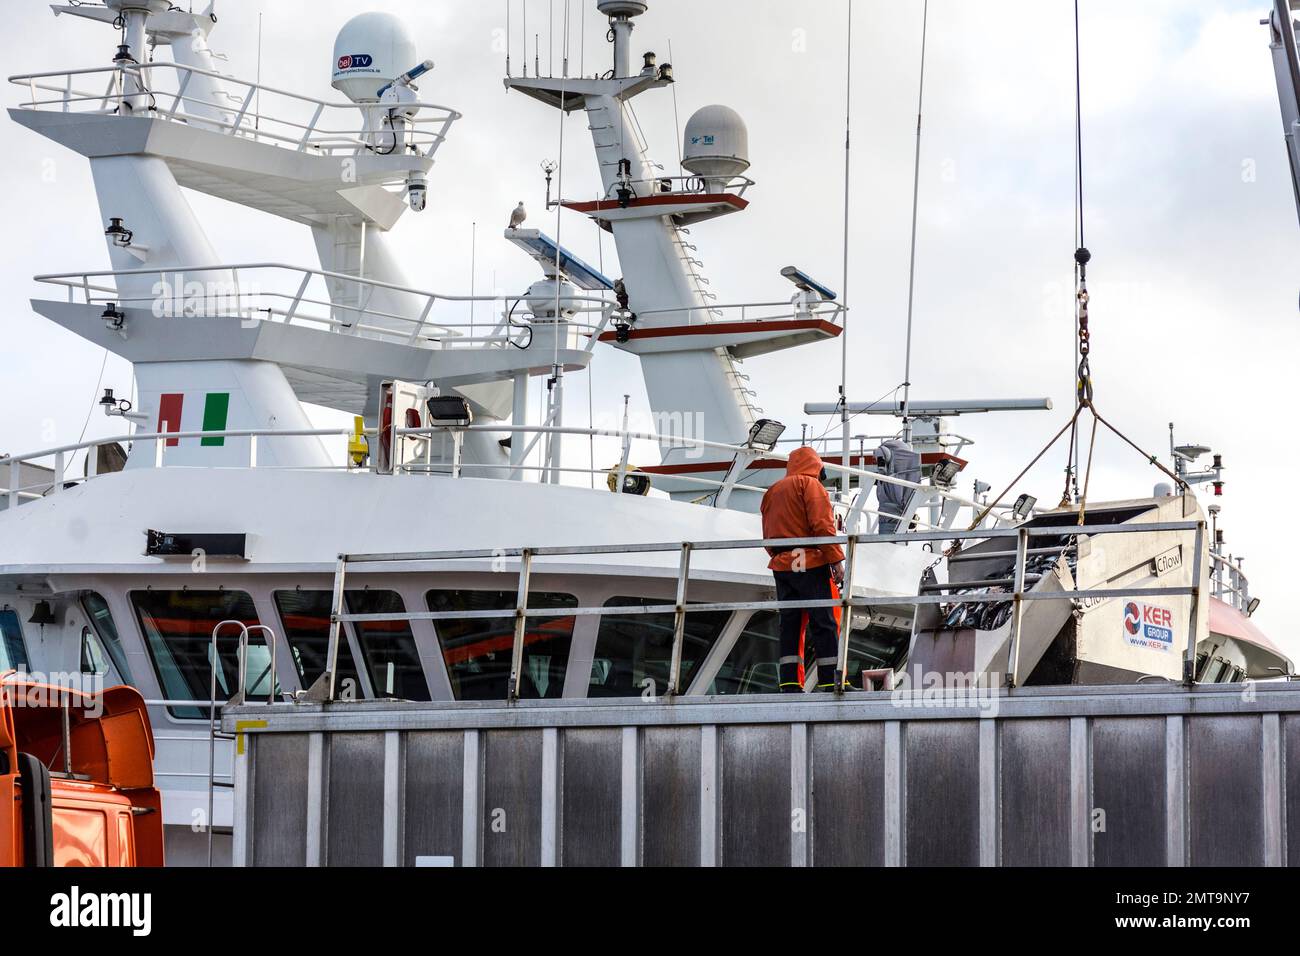 Unloading fish from ANTARCTIC super trawler in Killybegs, County Donegal, Ireland. Stock Photo